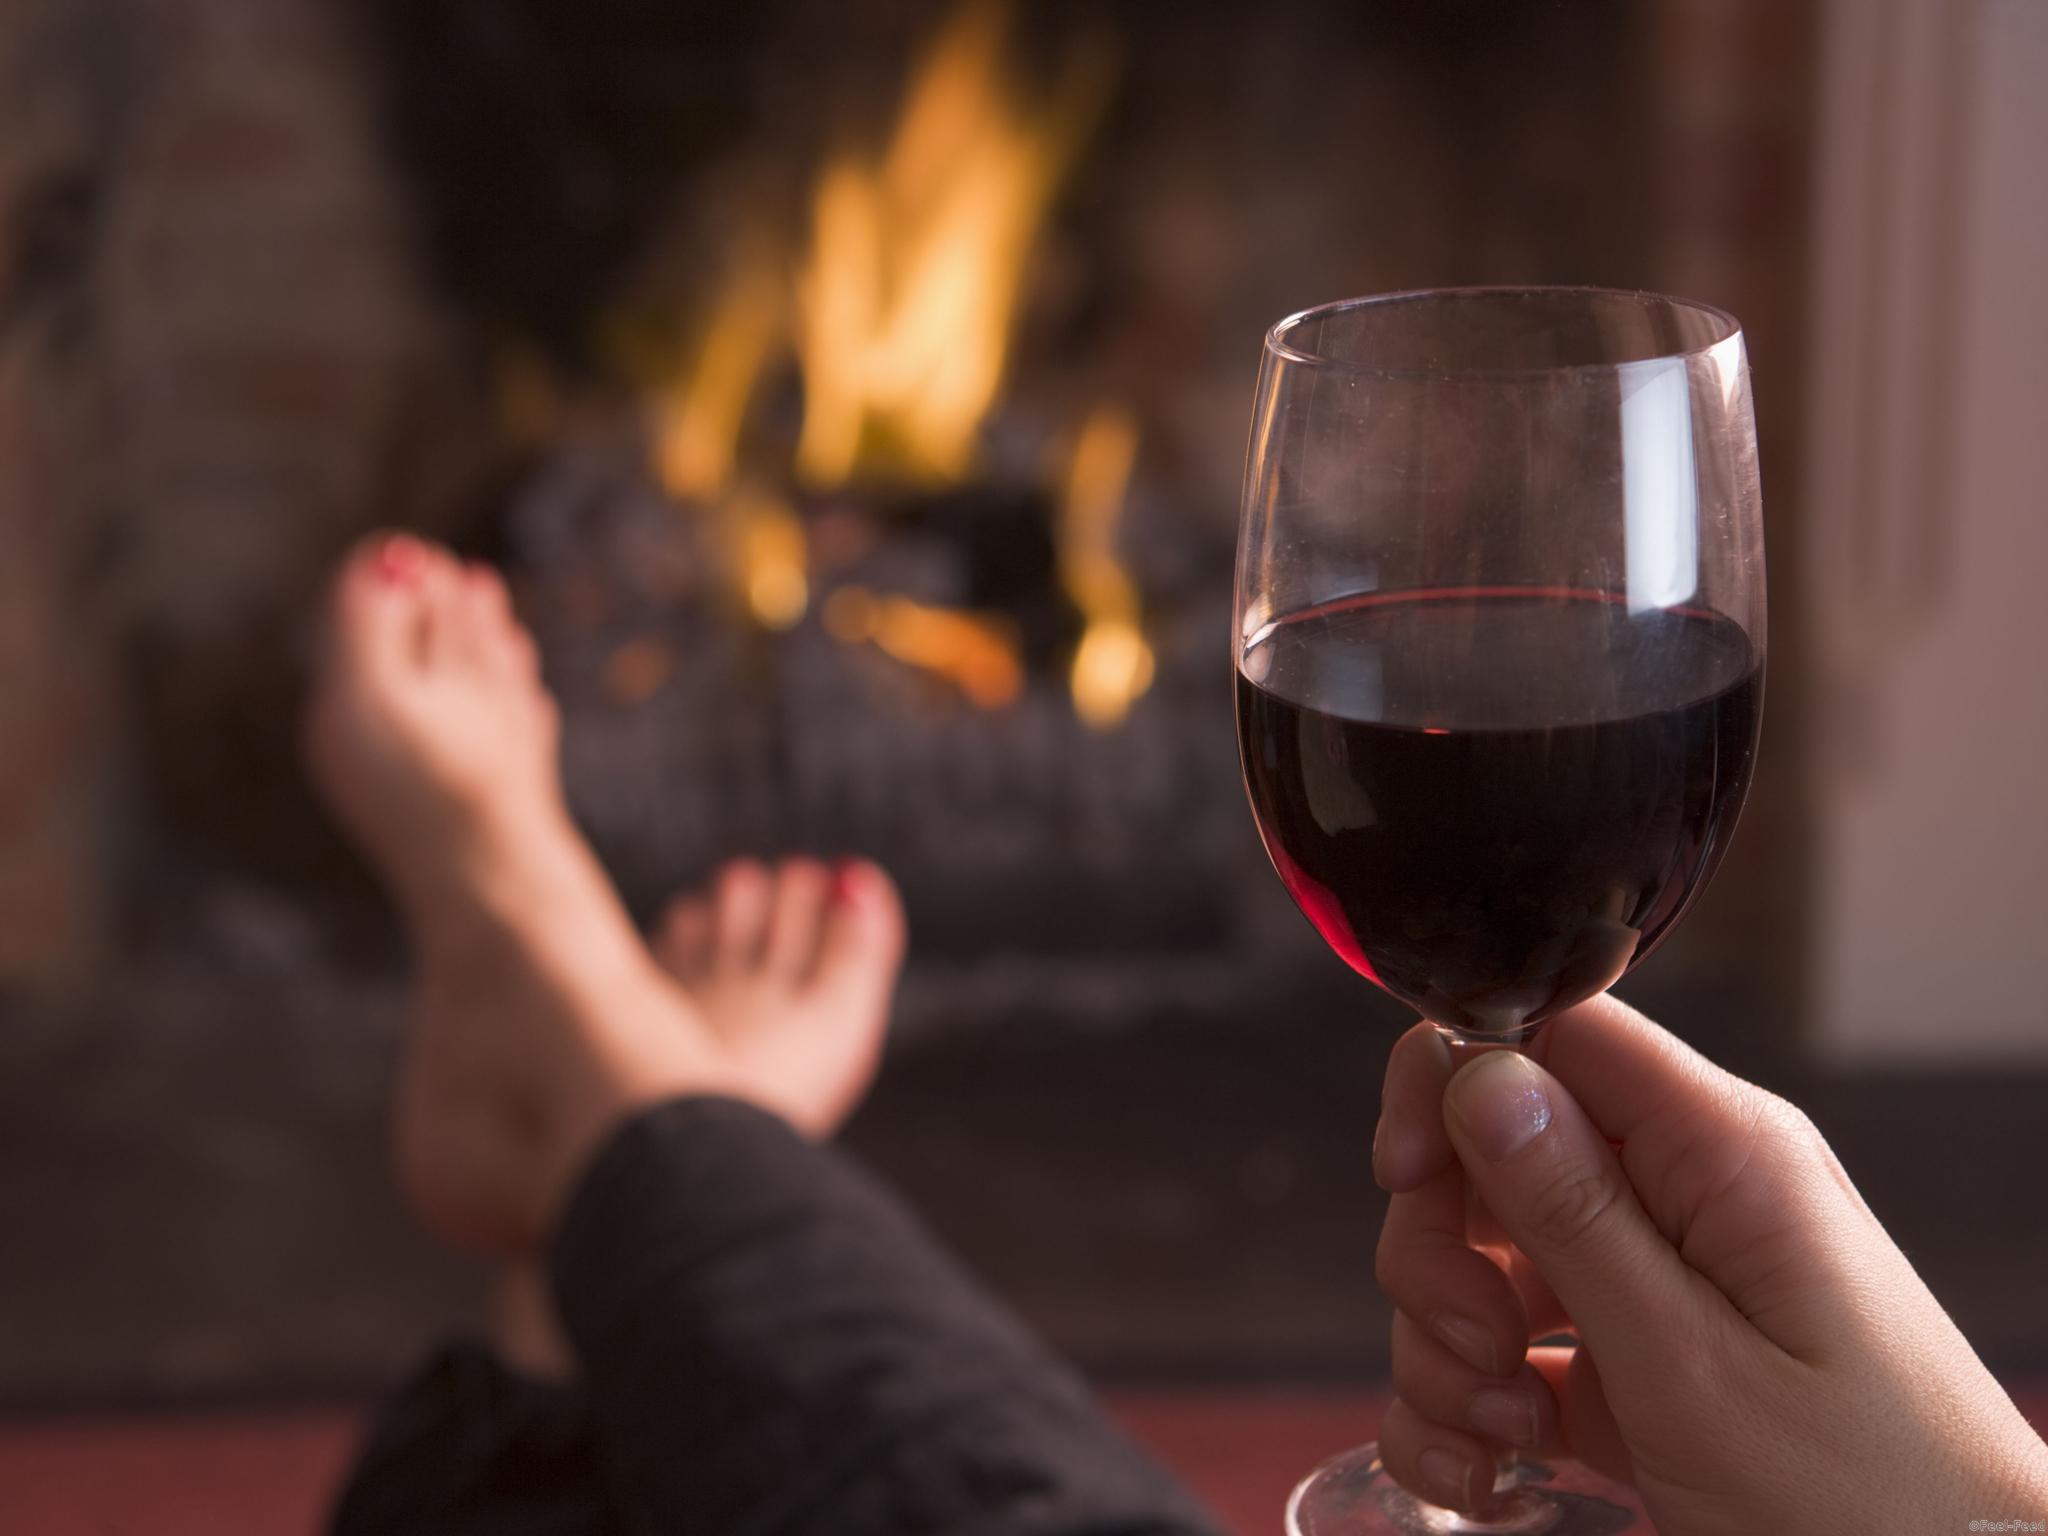 Mandatory Credit: Photo by Monkey Business Images/REX (1109309a) Model Released - Feet warming at fireplace with hand holding wine VARIOUS